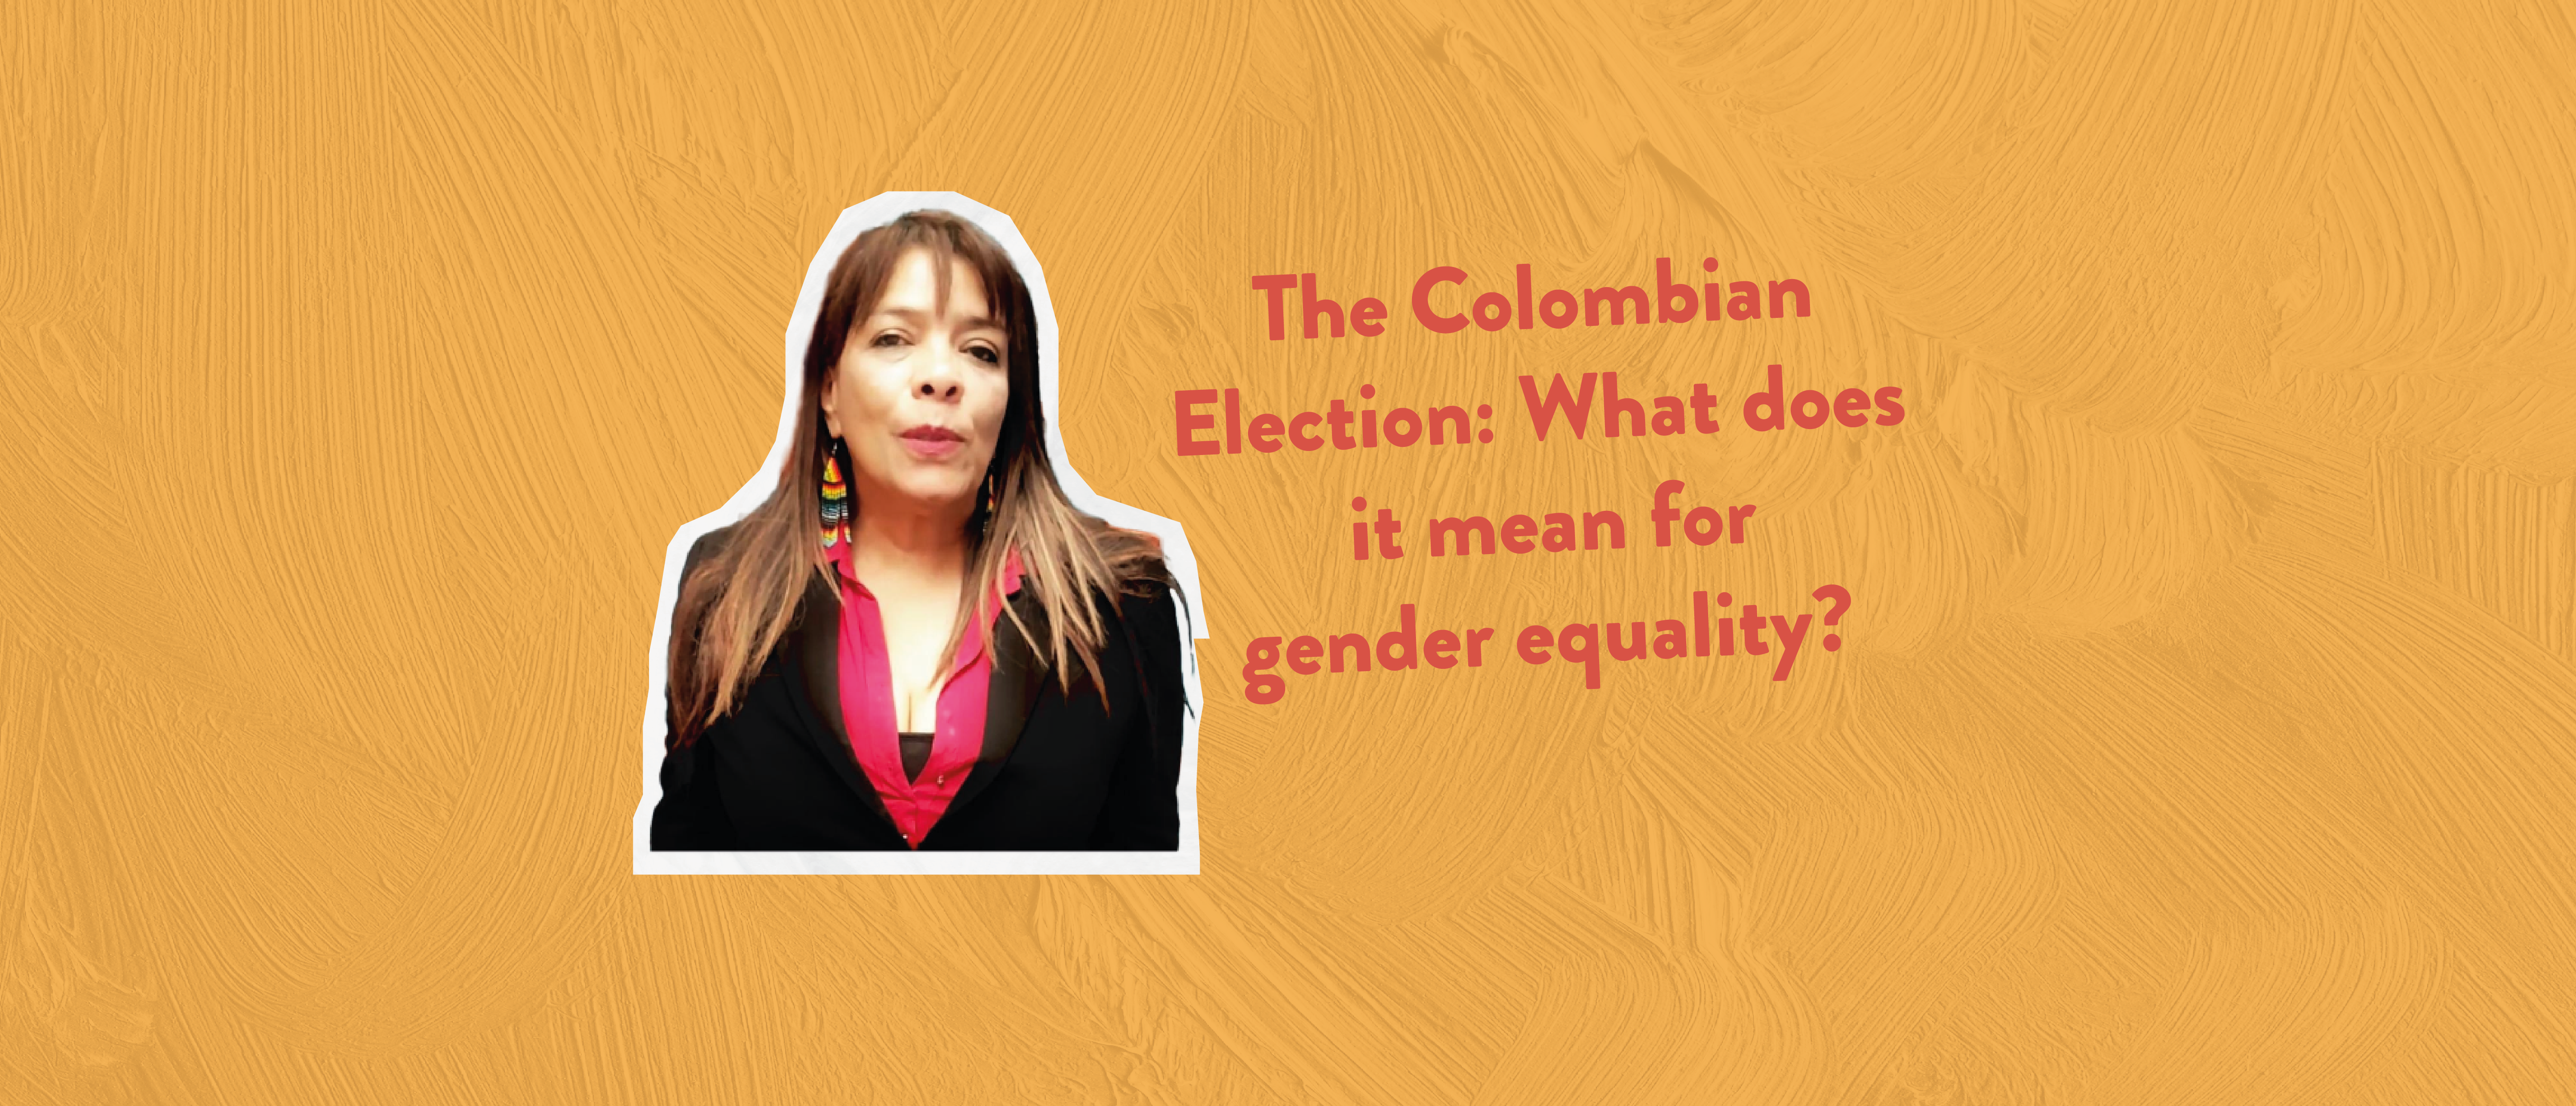 The Colombian Election: What does it mean for gender equality?